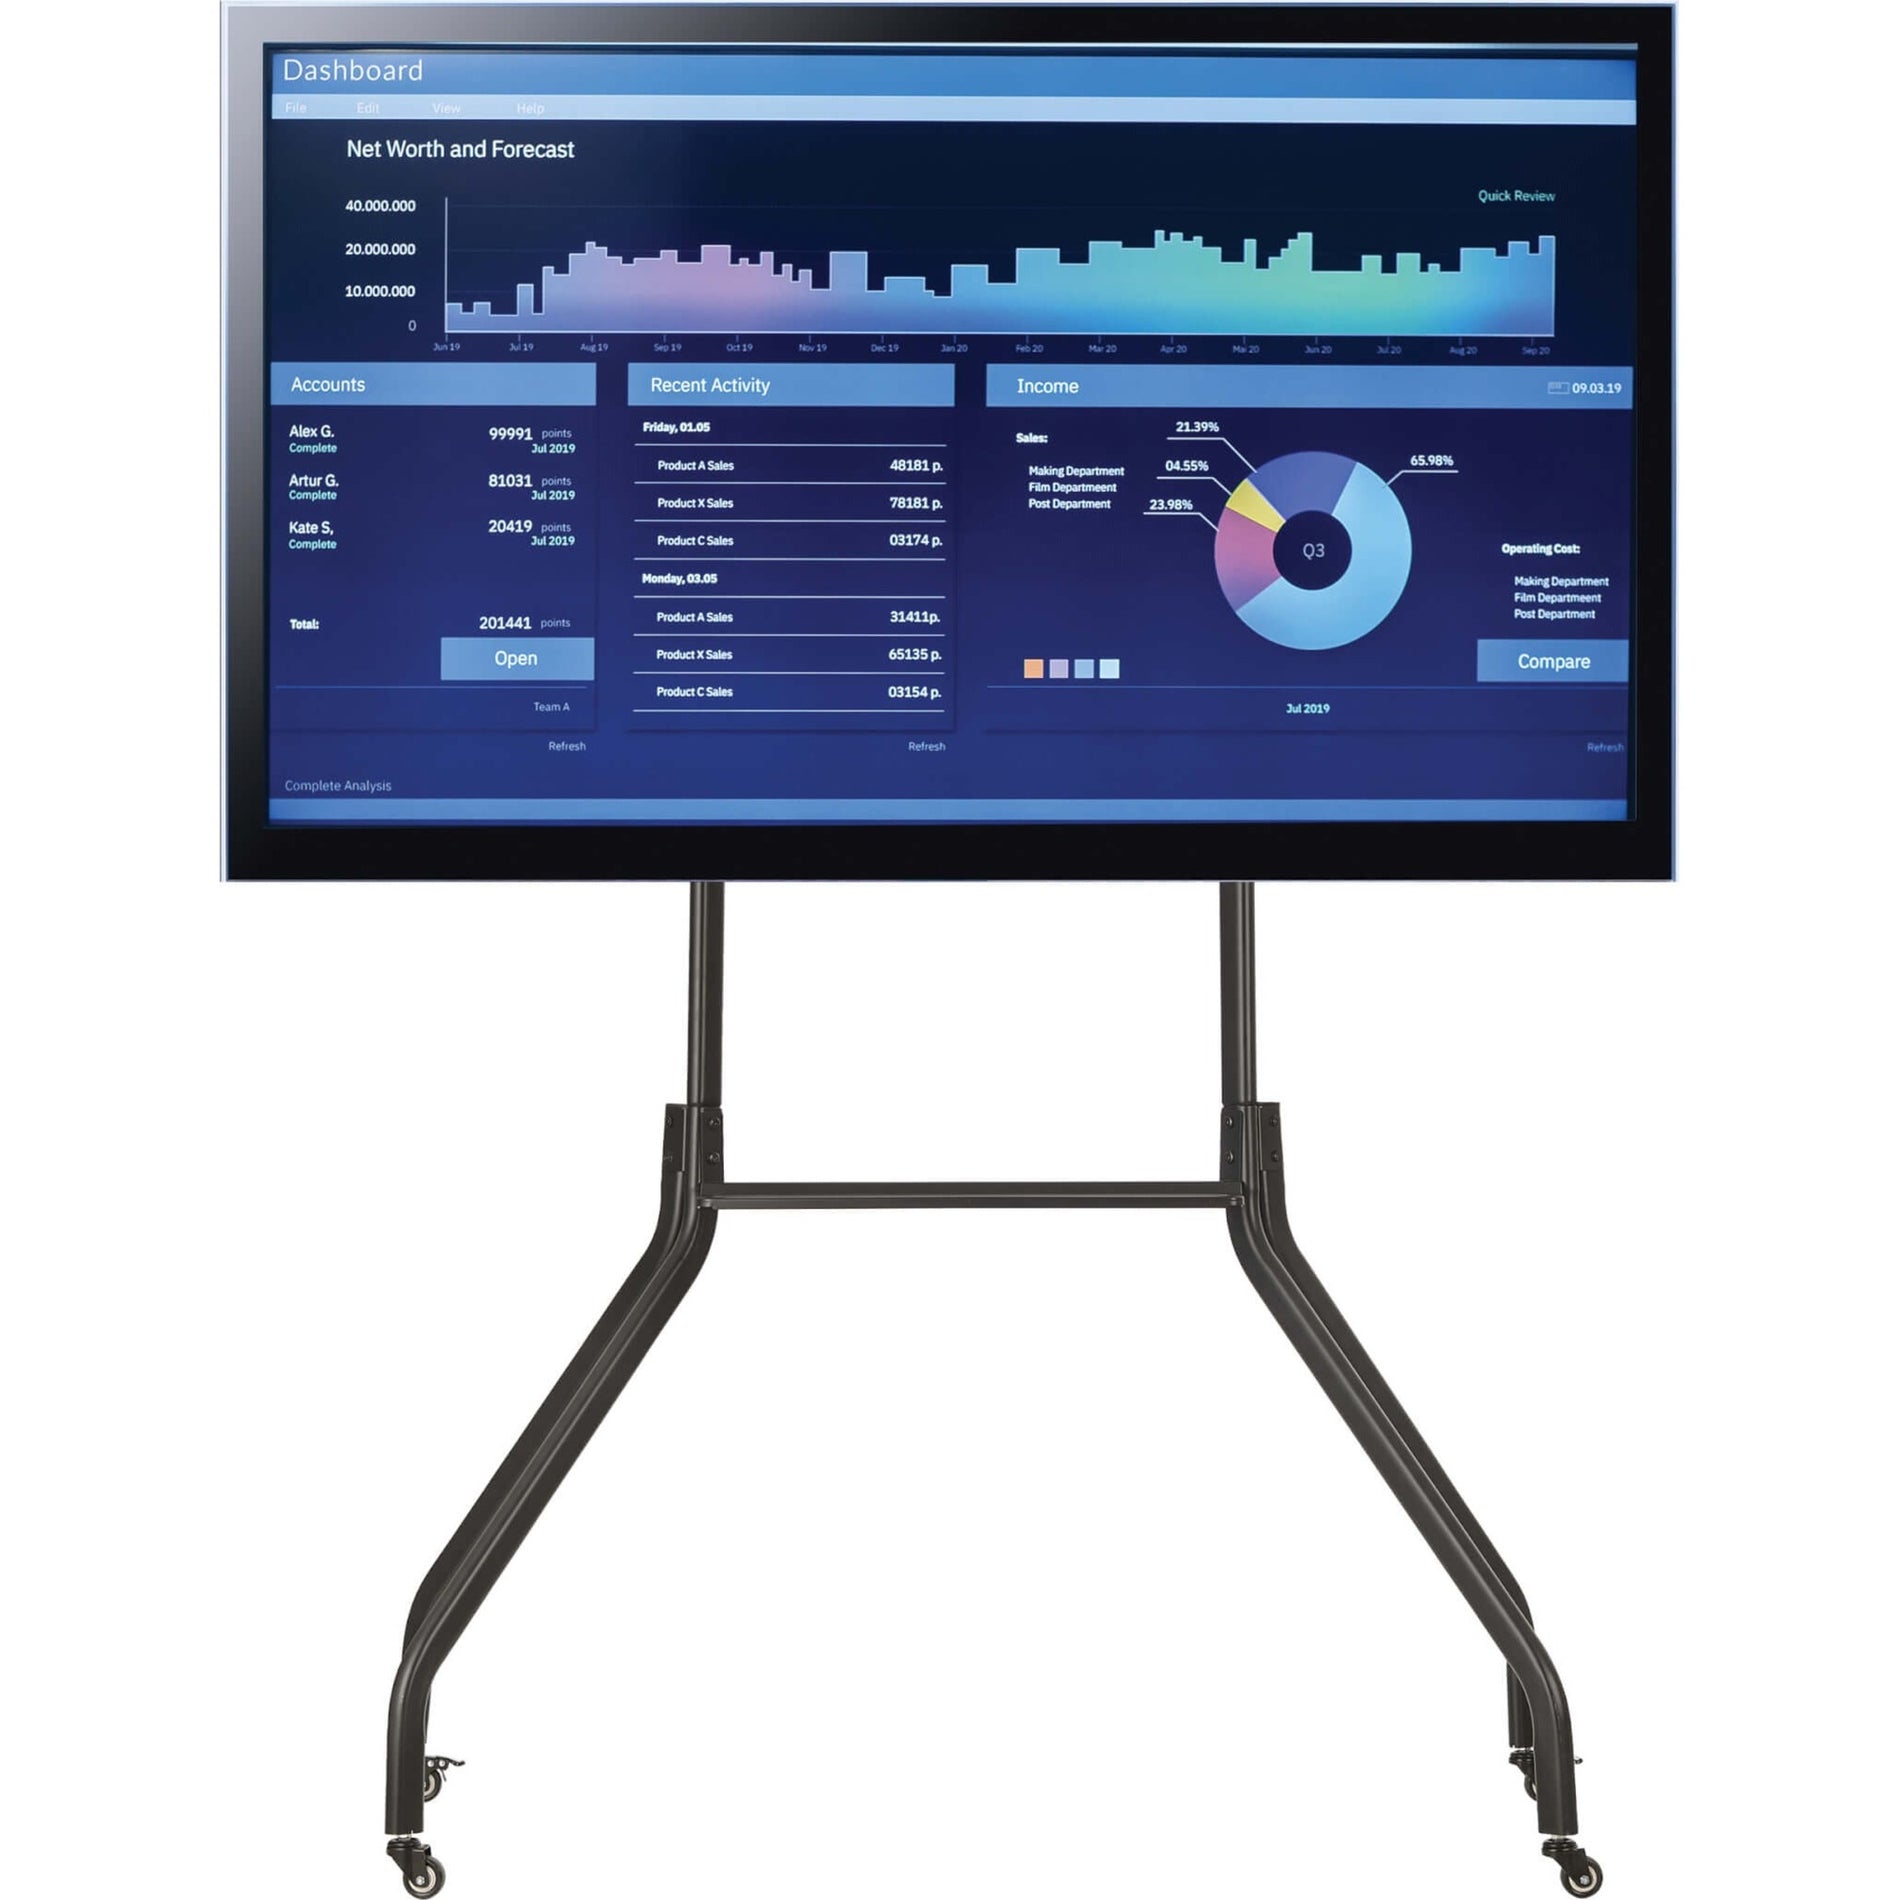 Rolling TV Cart for 55" to 85" Displays, Wide Legs, Locking Casters [Discontinued]